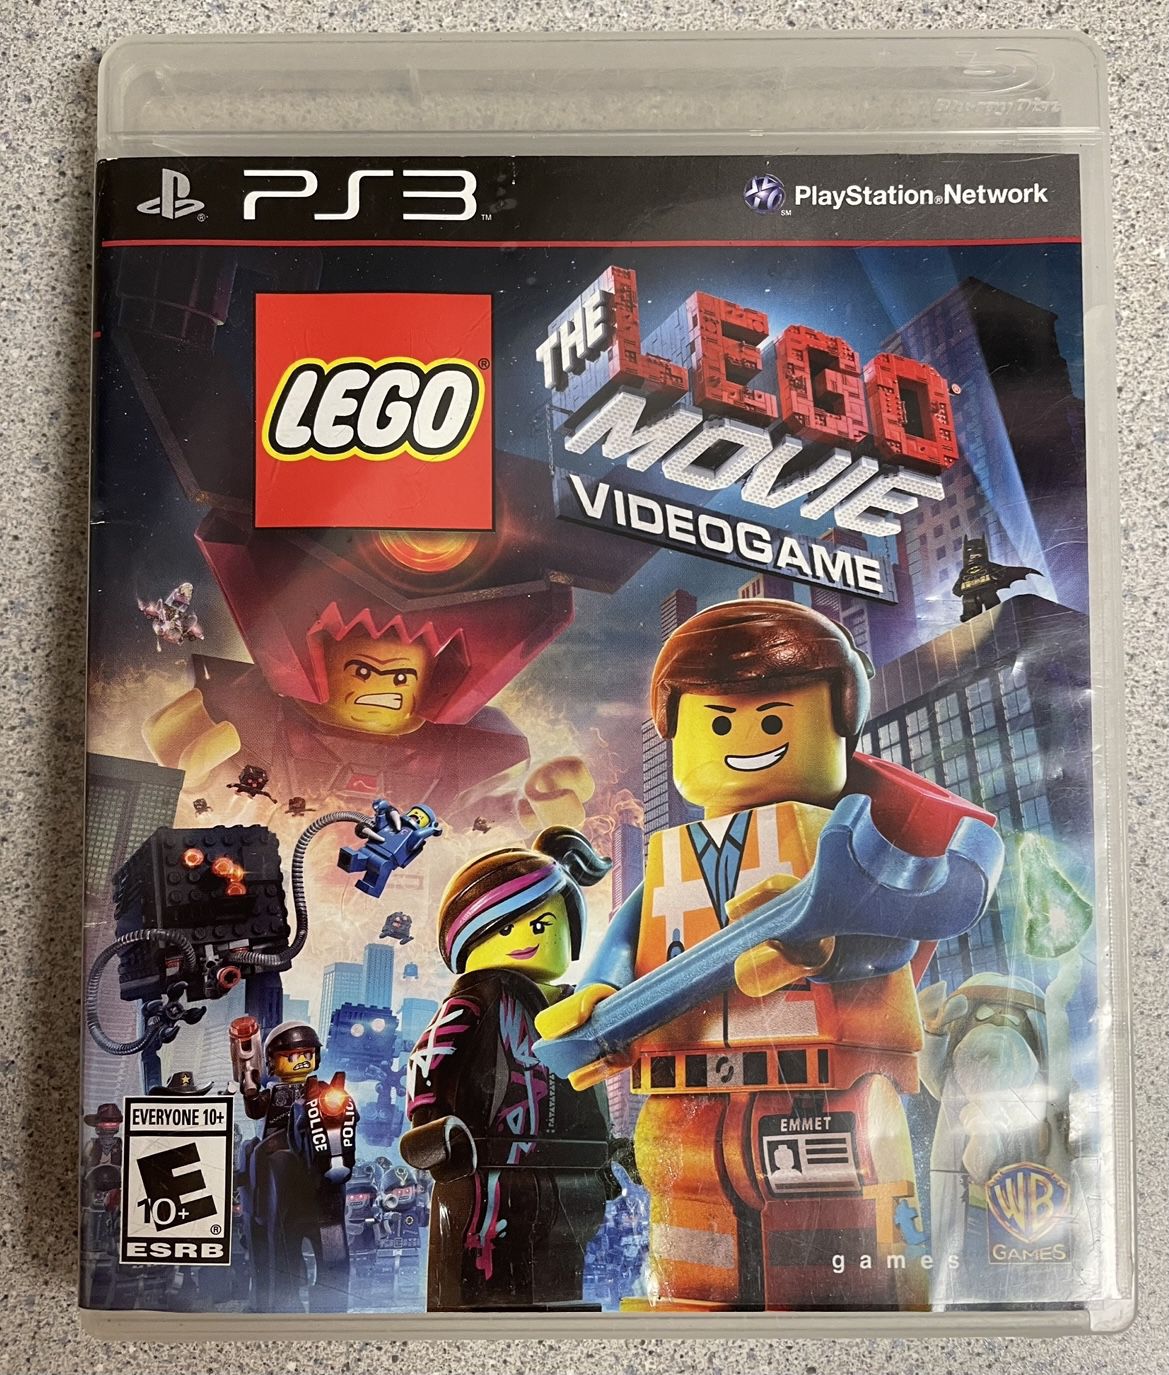 The LEGO Movie Videogame Sony PlayStation 3 PS3 Game LIKE NEW